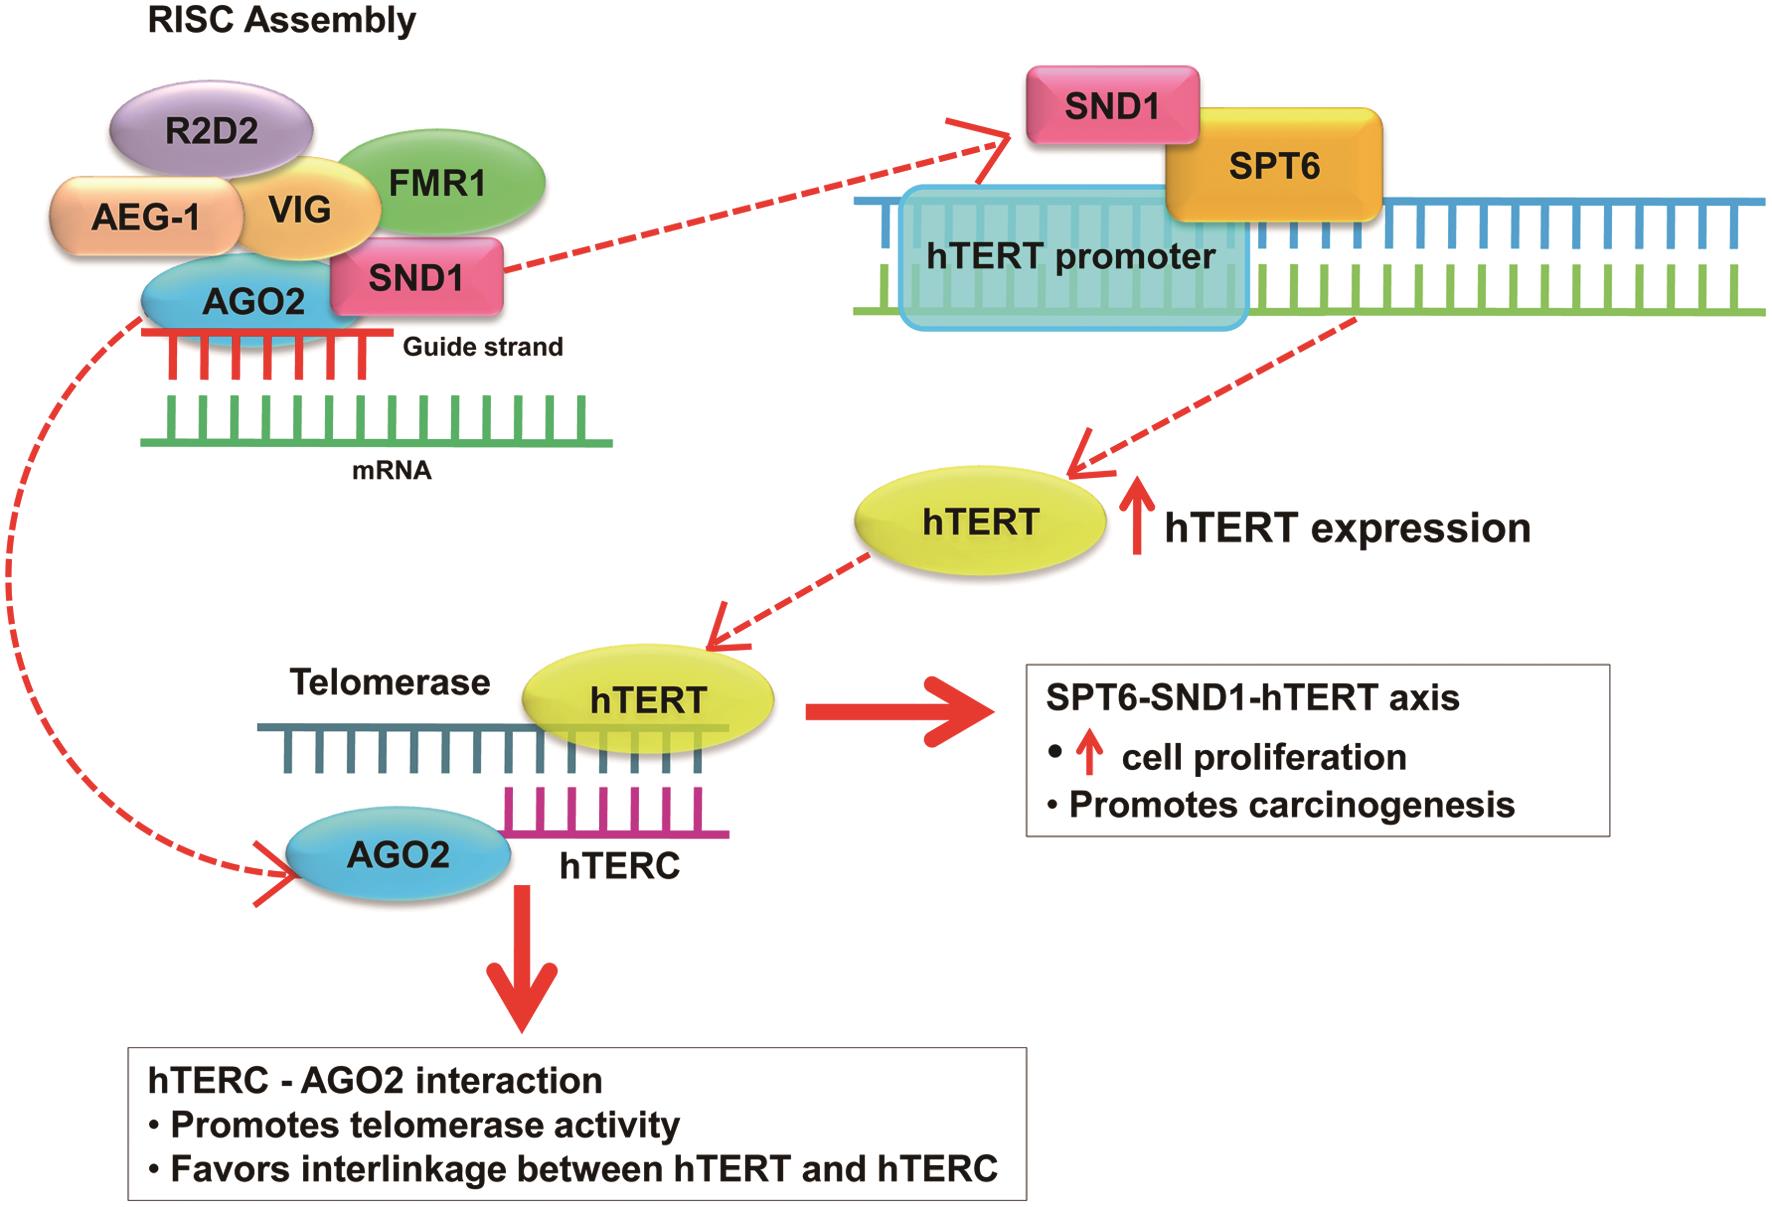 Schematic representation of the interaction between RISC components and telomerase in promoting HCC.